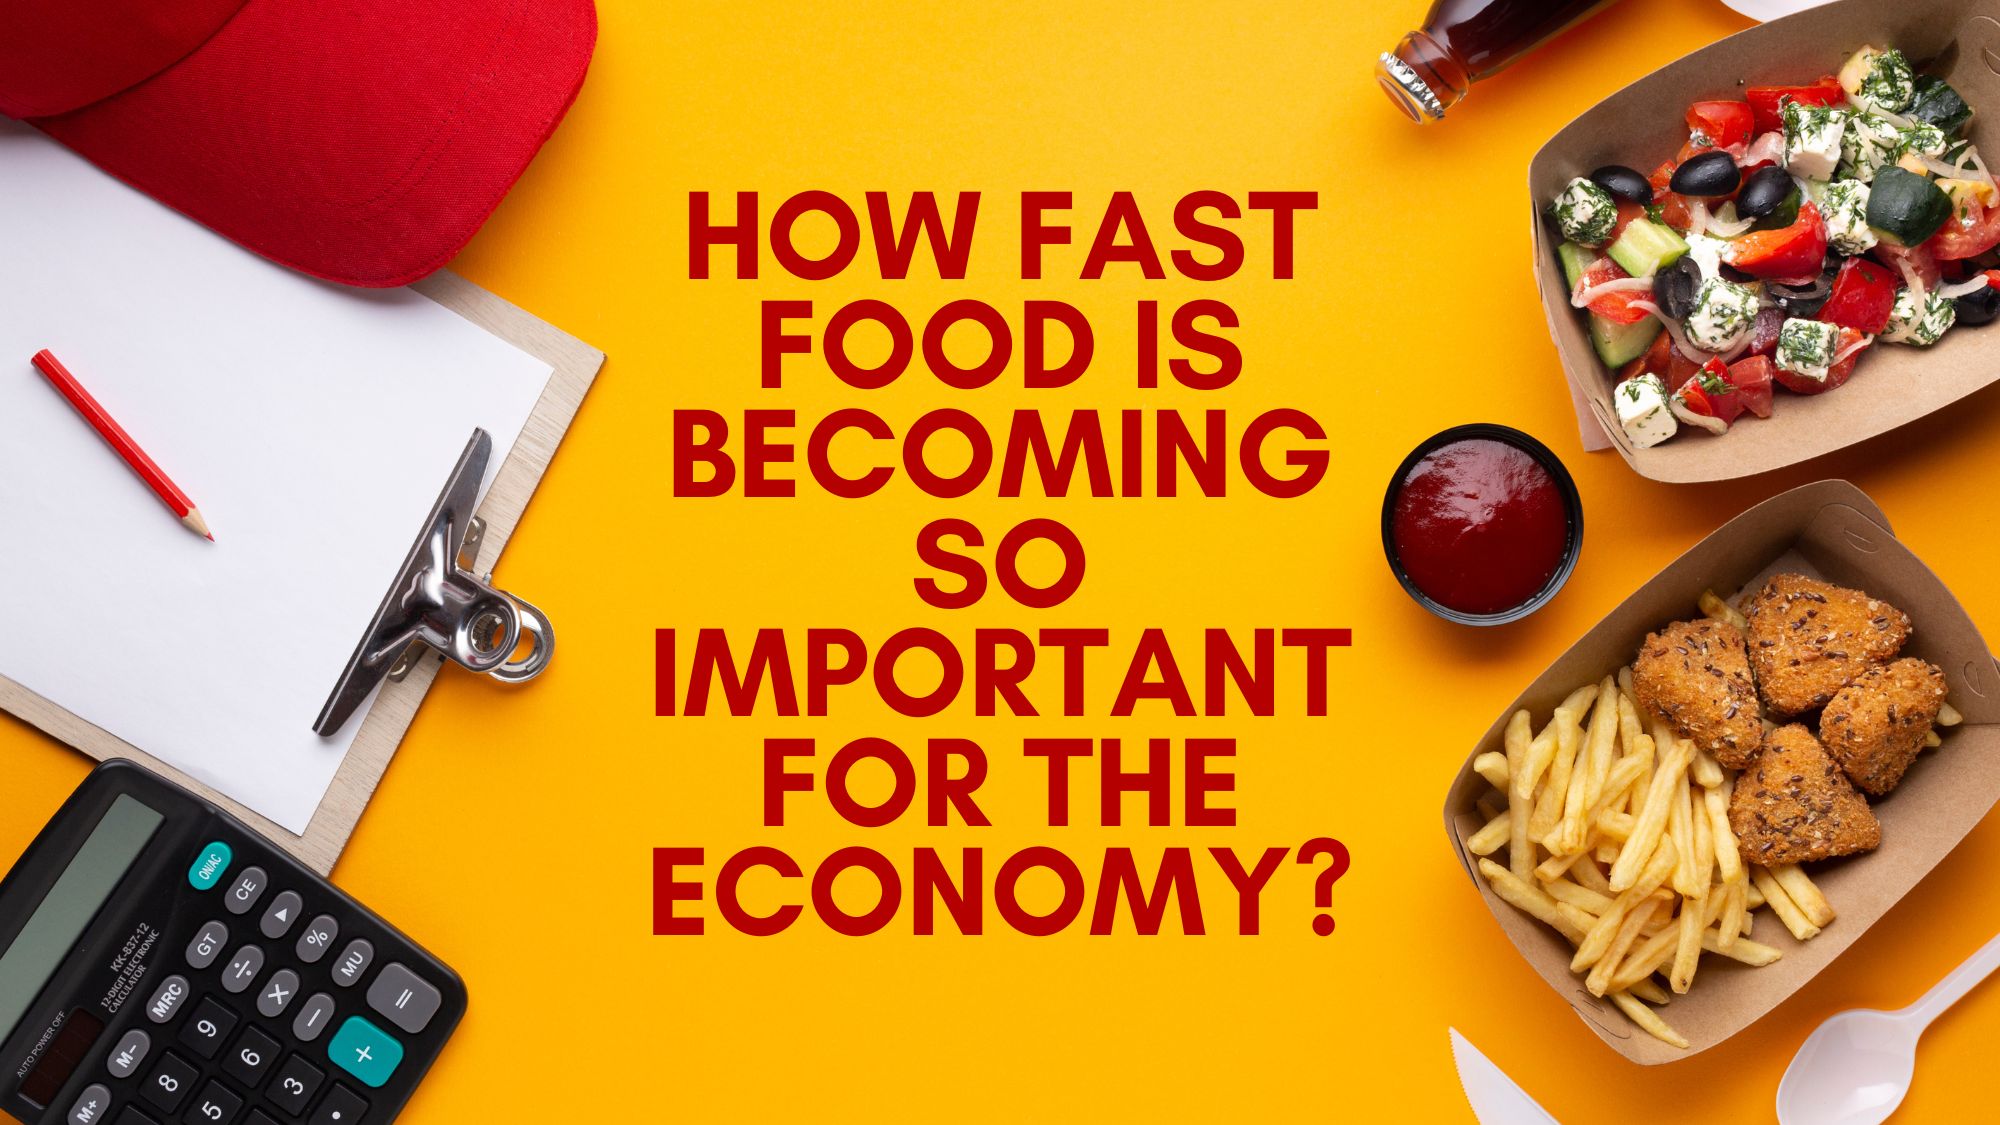 How Fast Food is Becoming So Important For the Economy?